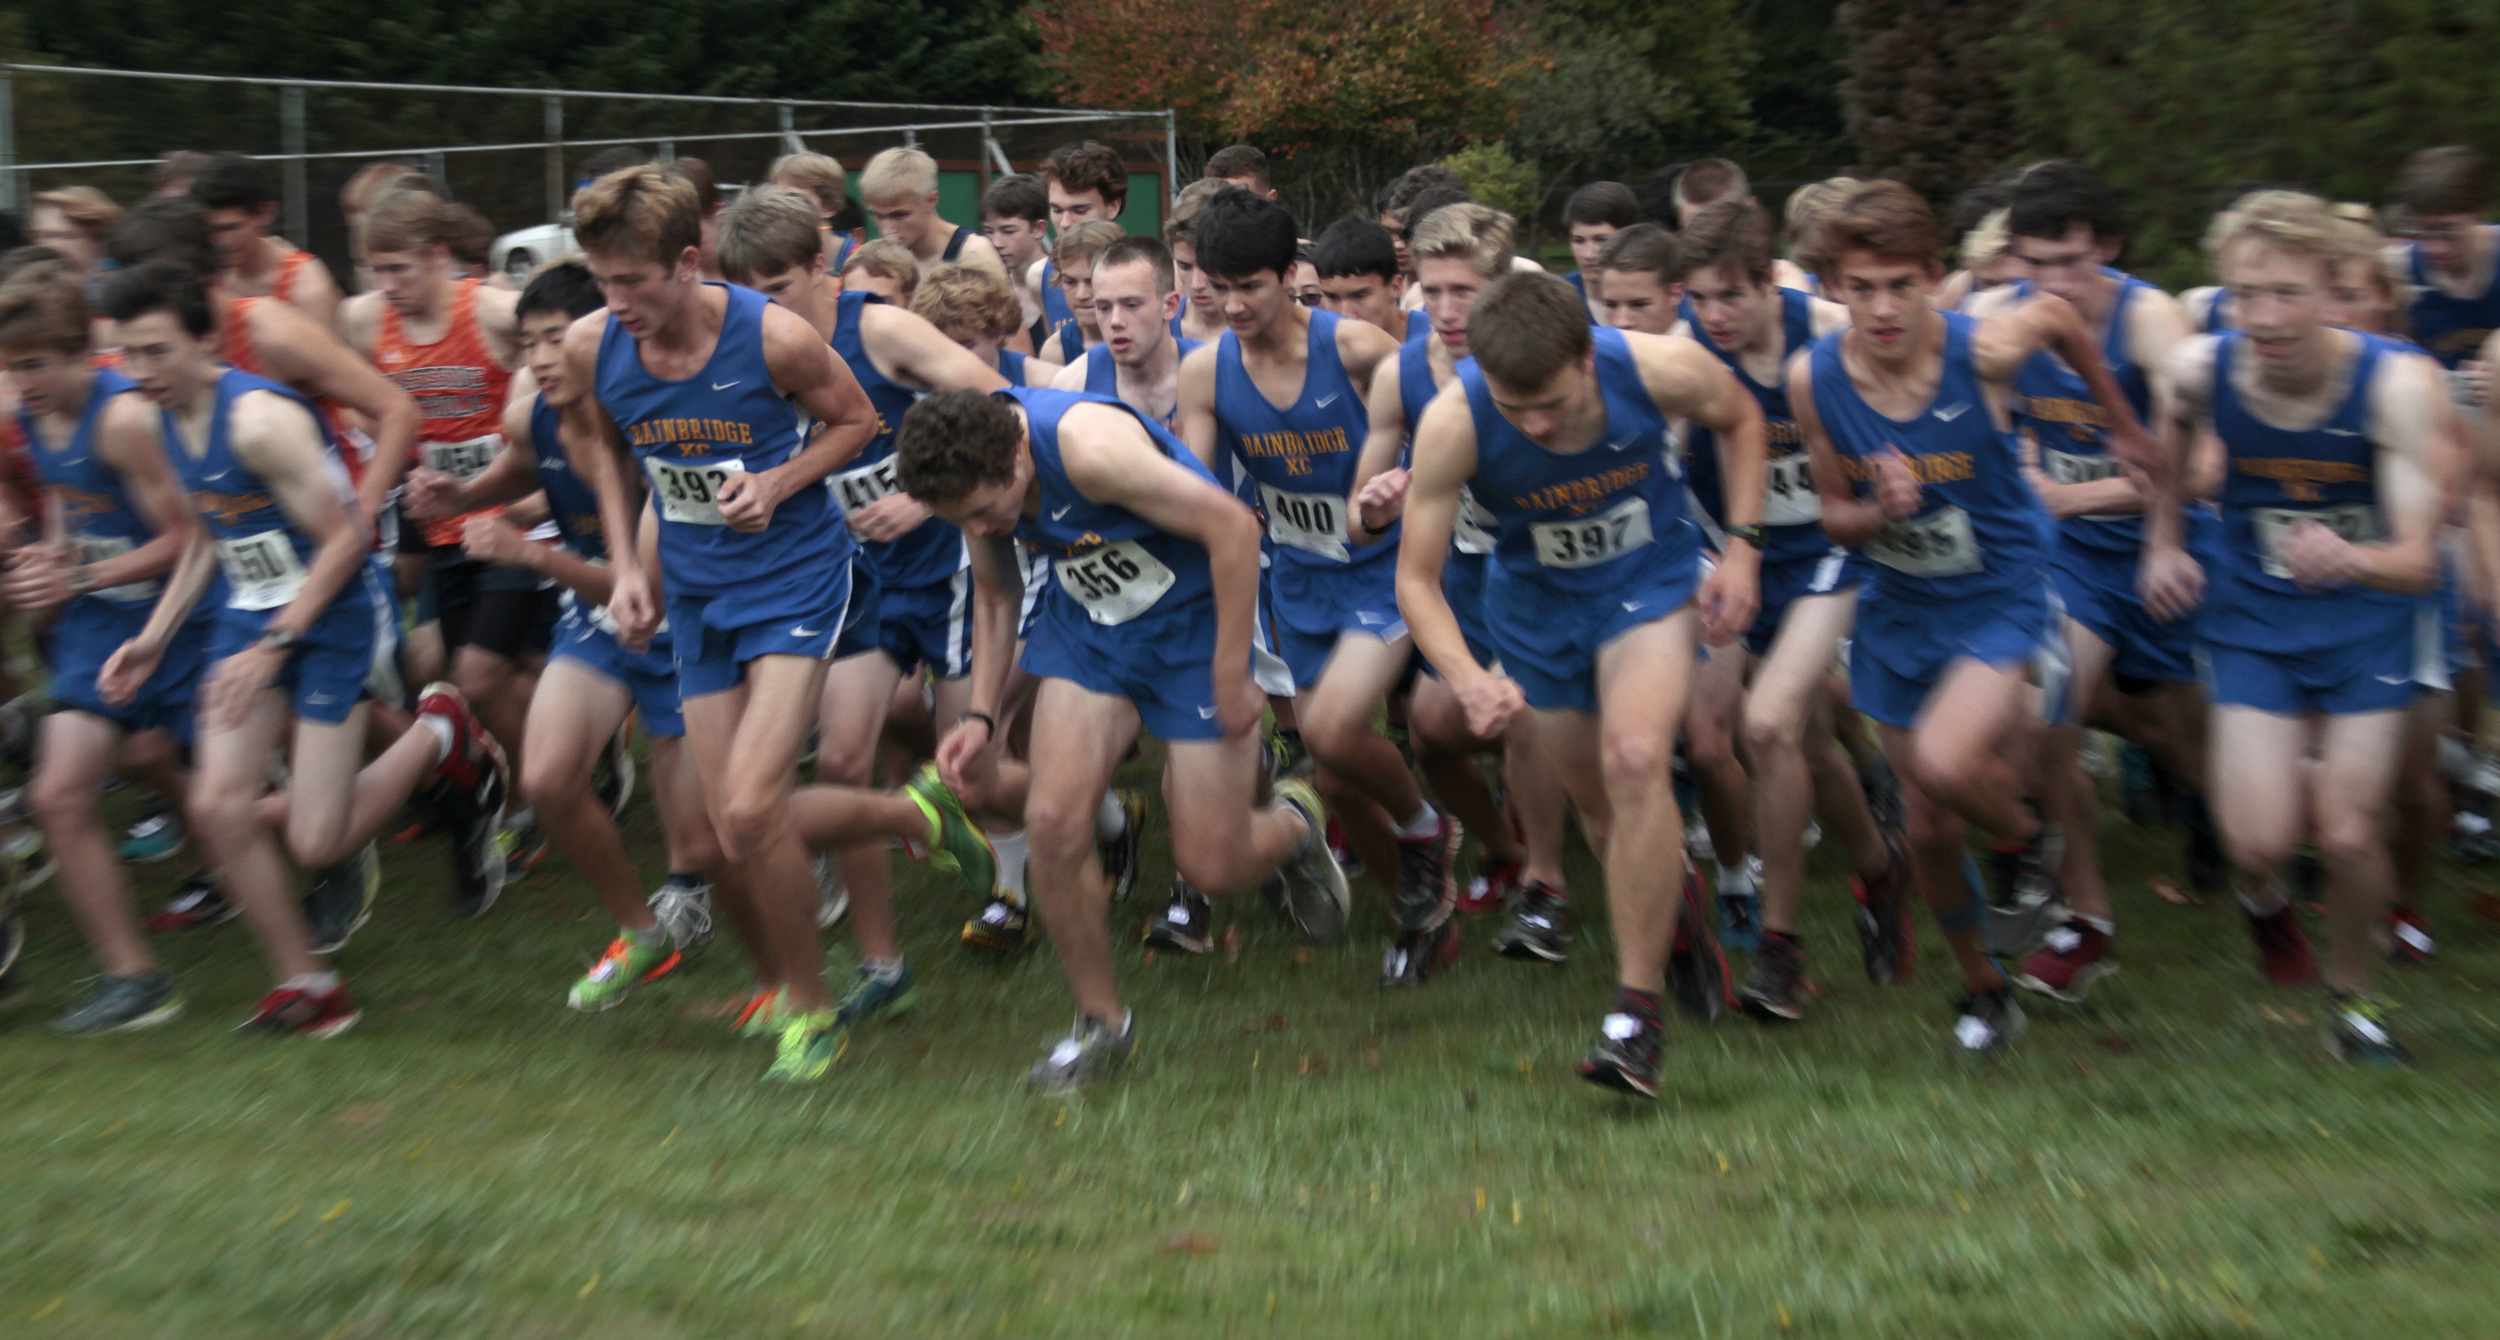  The start of the mens event at the sole home meet of the Bainbridge High cross country team’s last season.&nbsp;BHS took first place in both the mens and womens divisions, beating out runners from Eastside Catholic, Franklin and Chief Sealth 